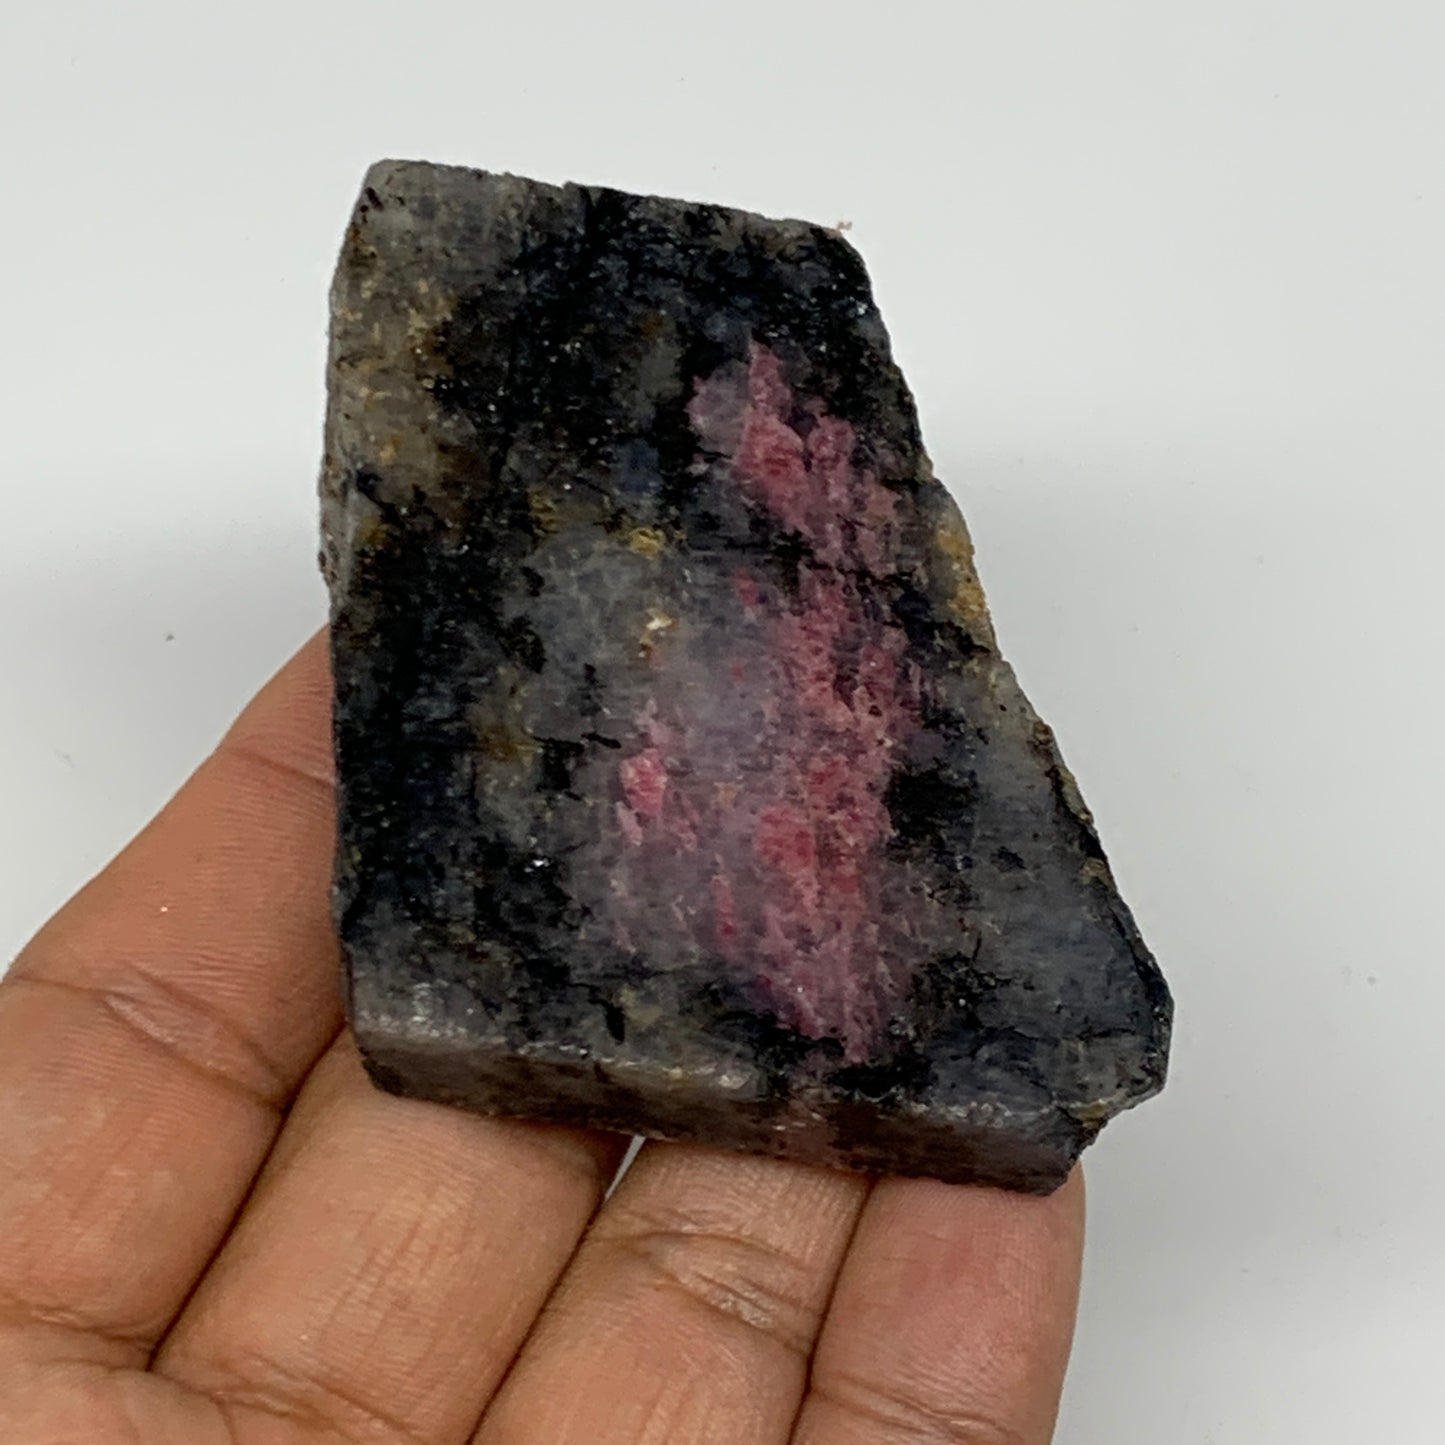 74.9g, 2.3"x1.9"x0.5", One face polished Rhodonite, One face semi polished, B160